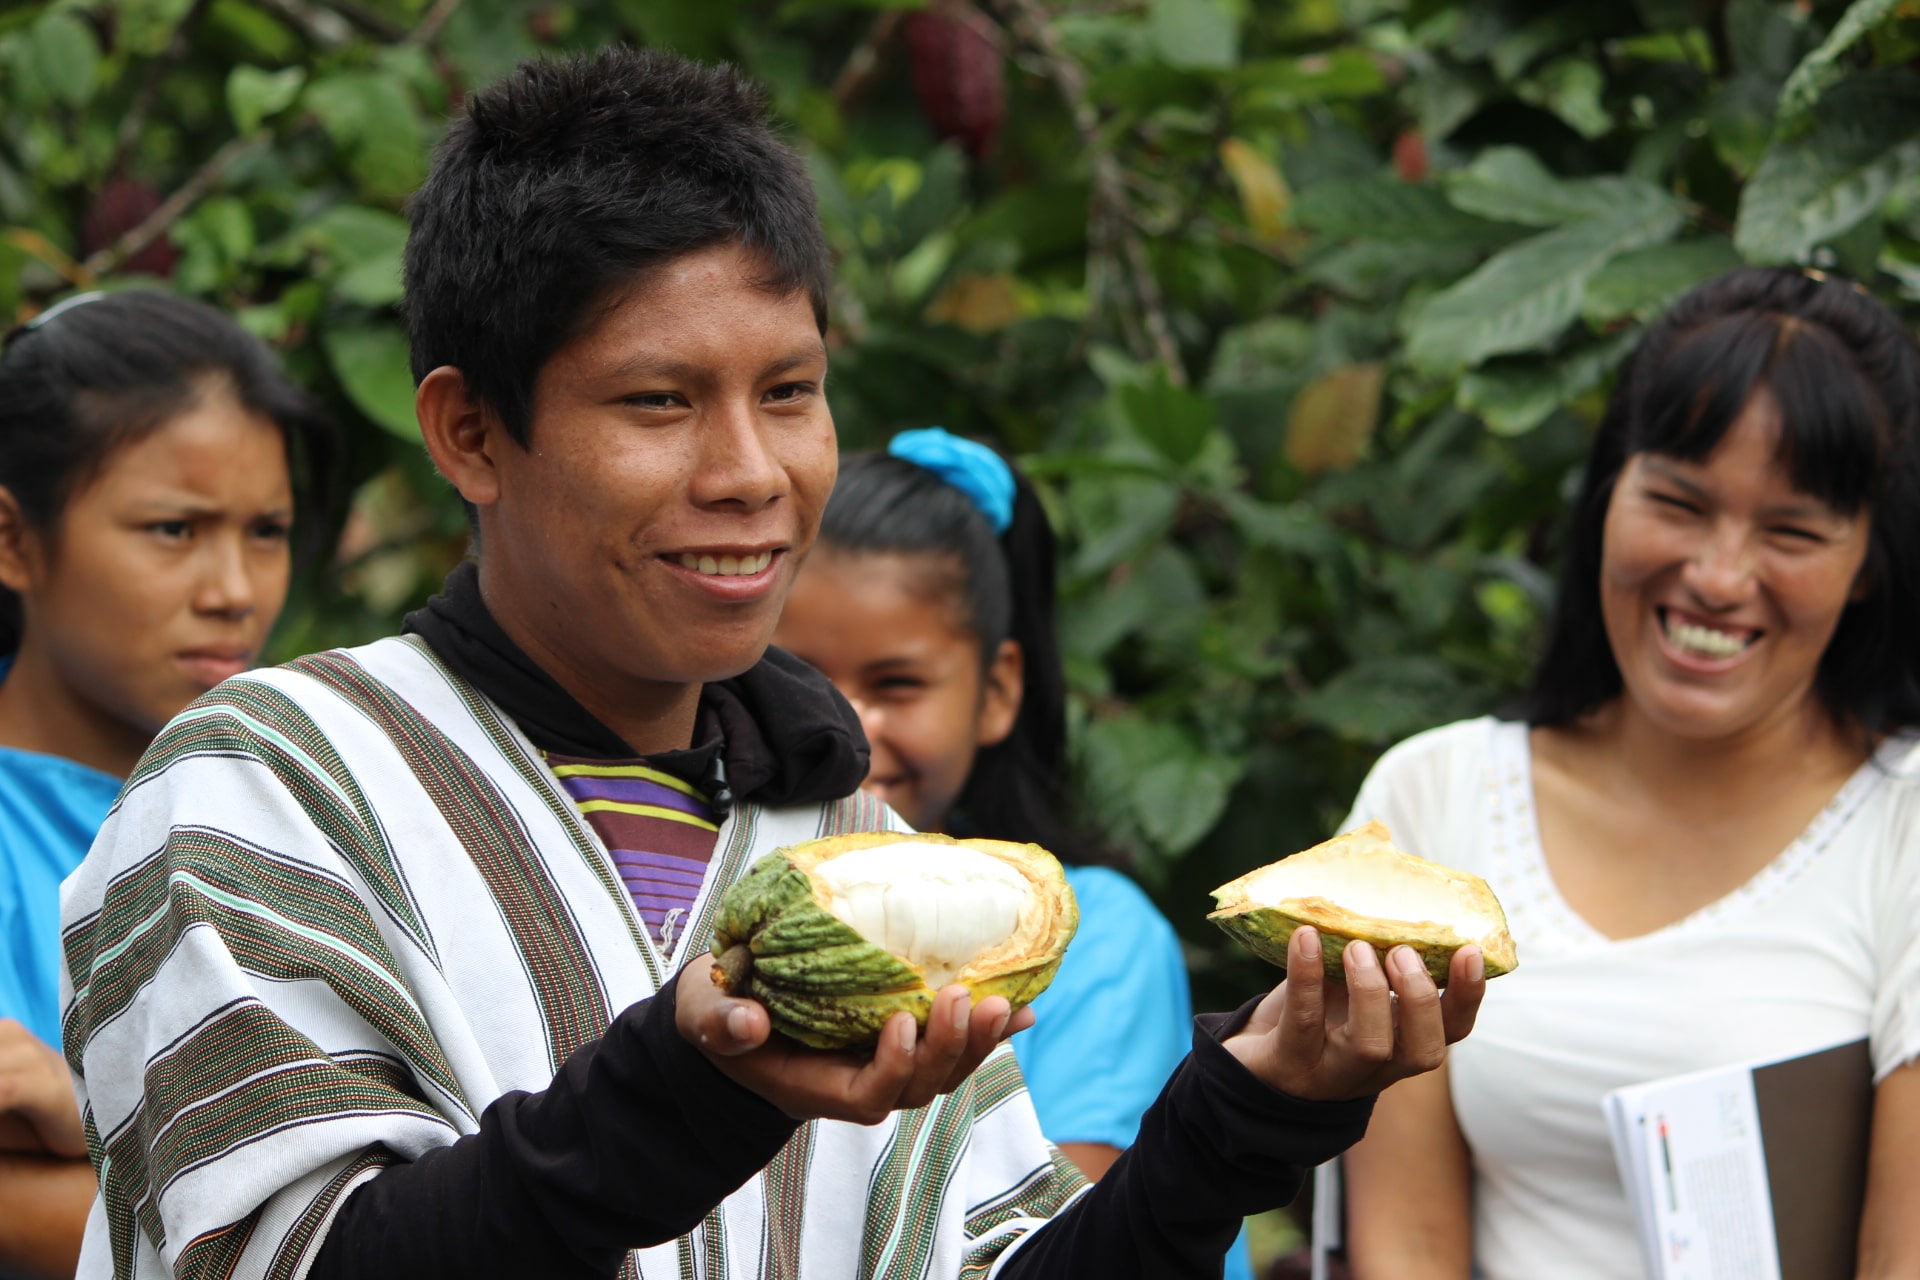 In the Protected Natural Areas, various sustainable initiatives are promoted by native communities belonging to indigenous or native peoples. In the photo, an inhabitant of the Ashaninka Communal Reserve (Junín) shows the cocoa fruit, which is being sustainably produced in this PNA.